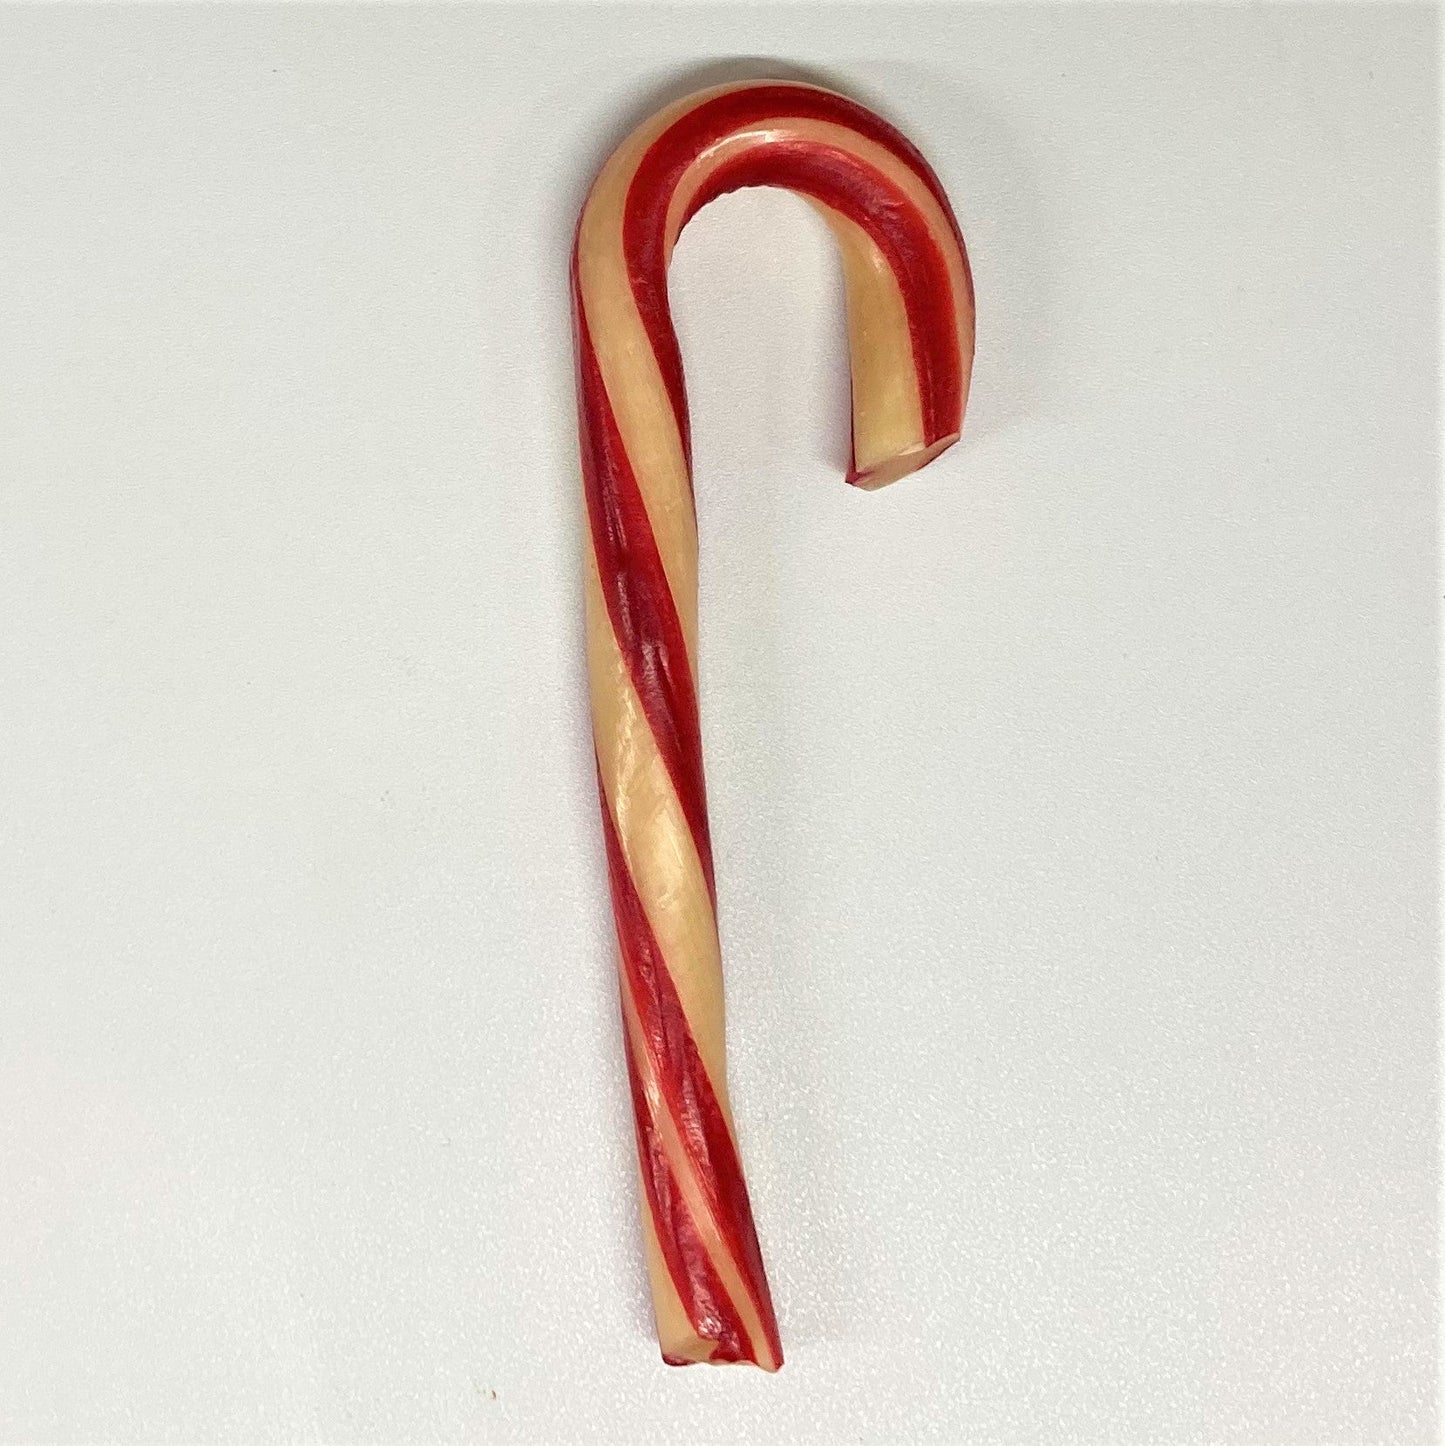 Handmade Peppermint Candy Canes by Stage Stop Candy